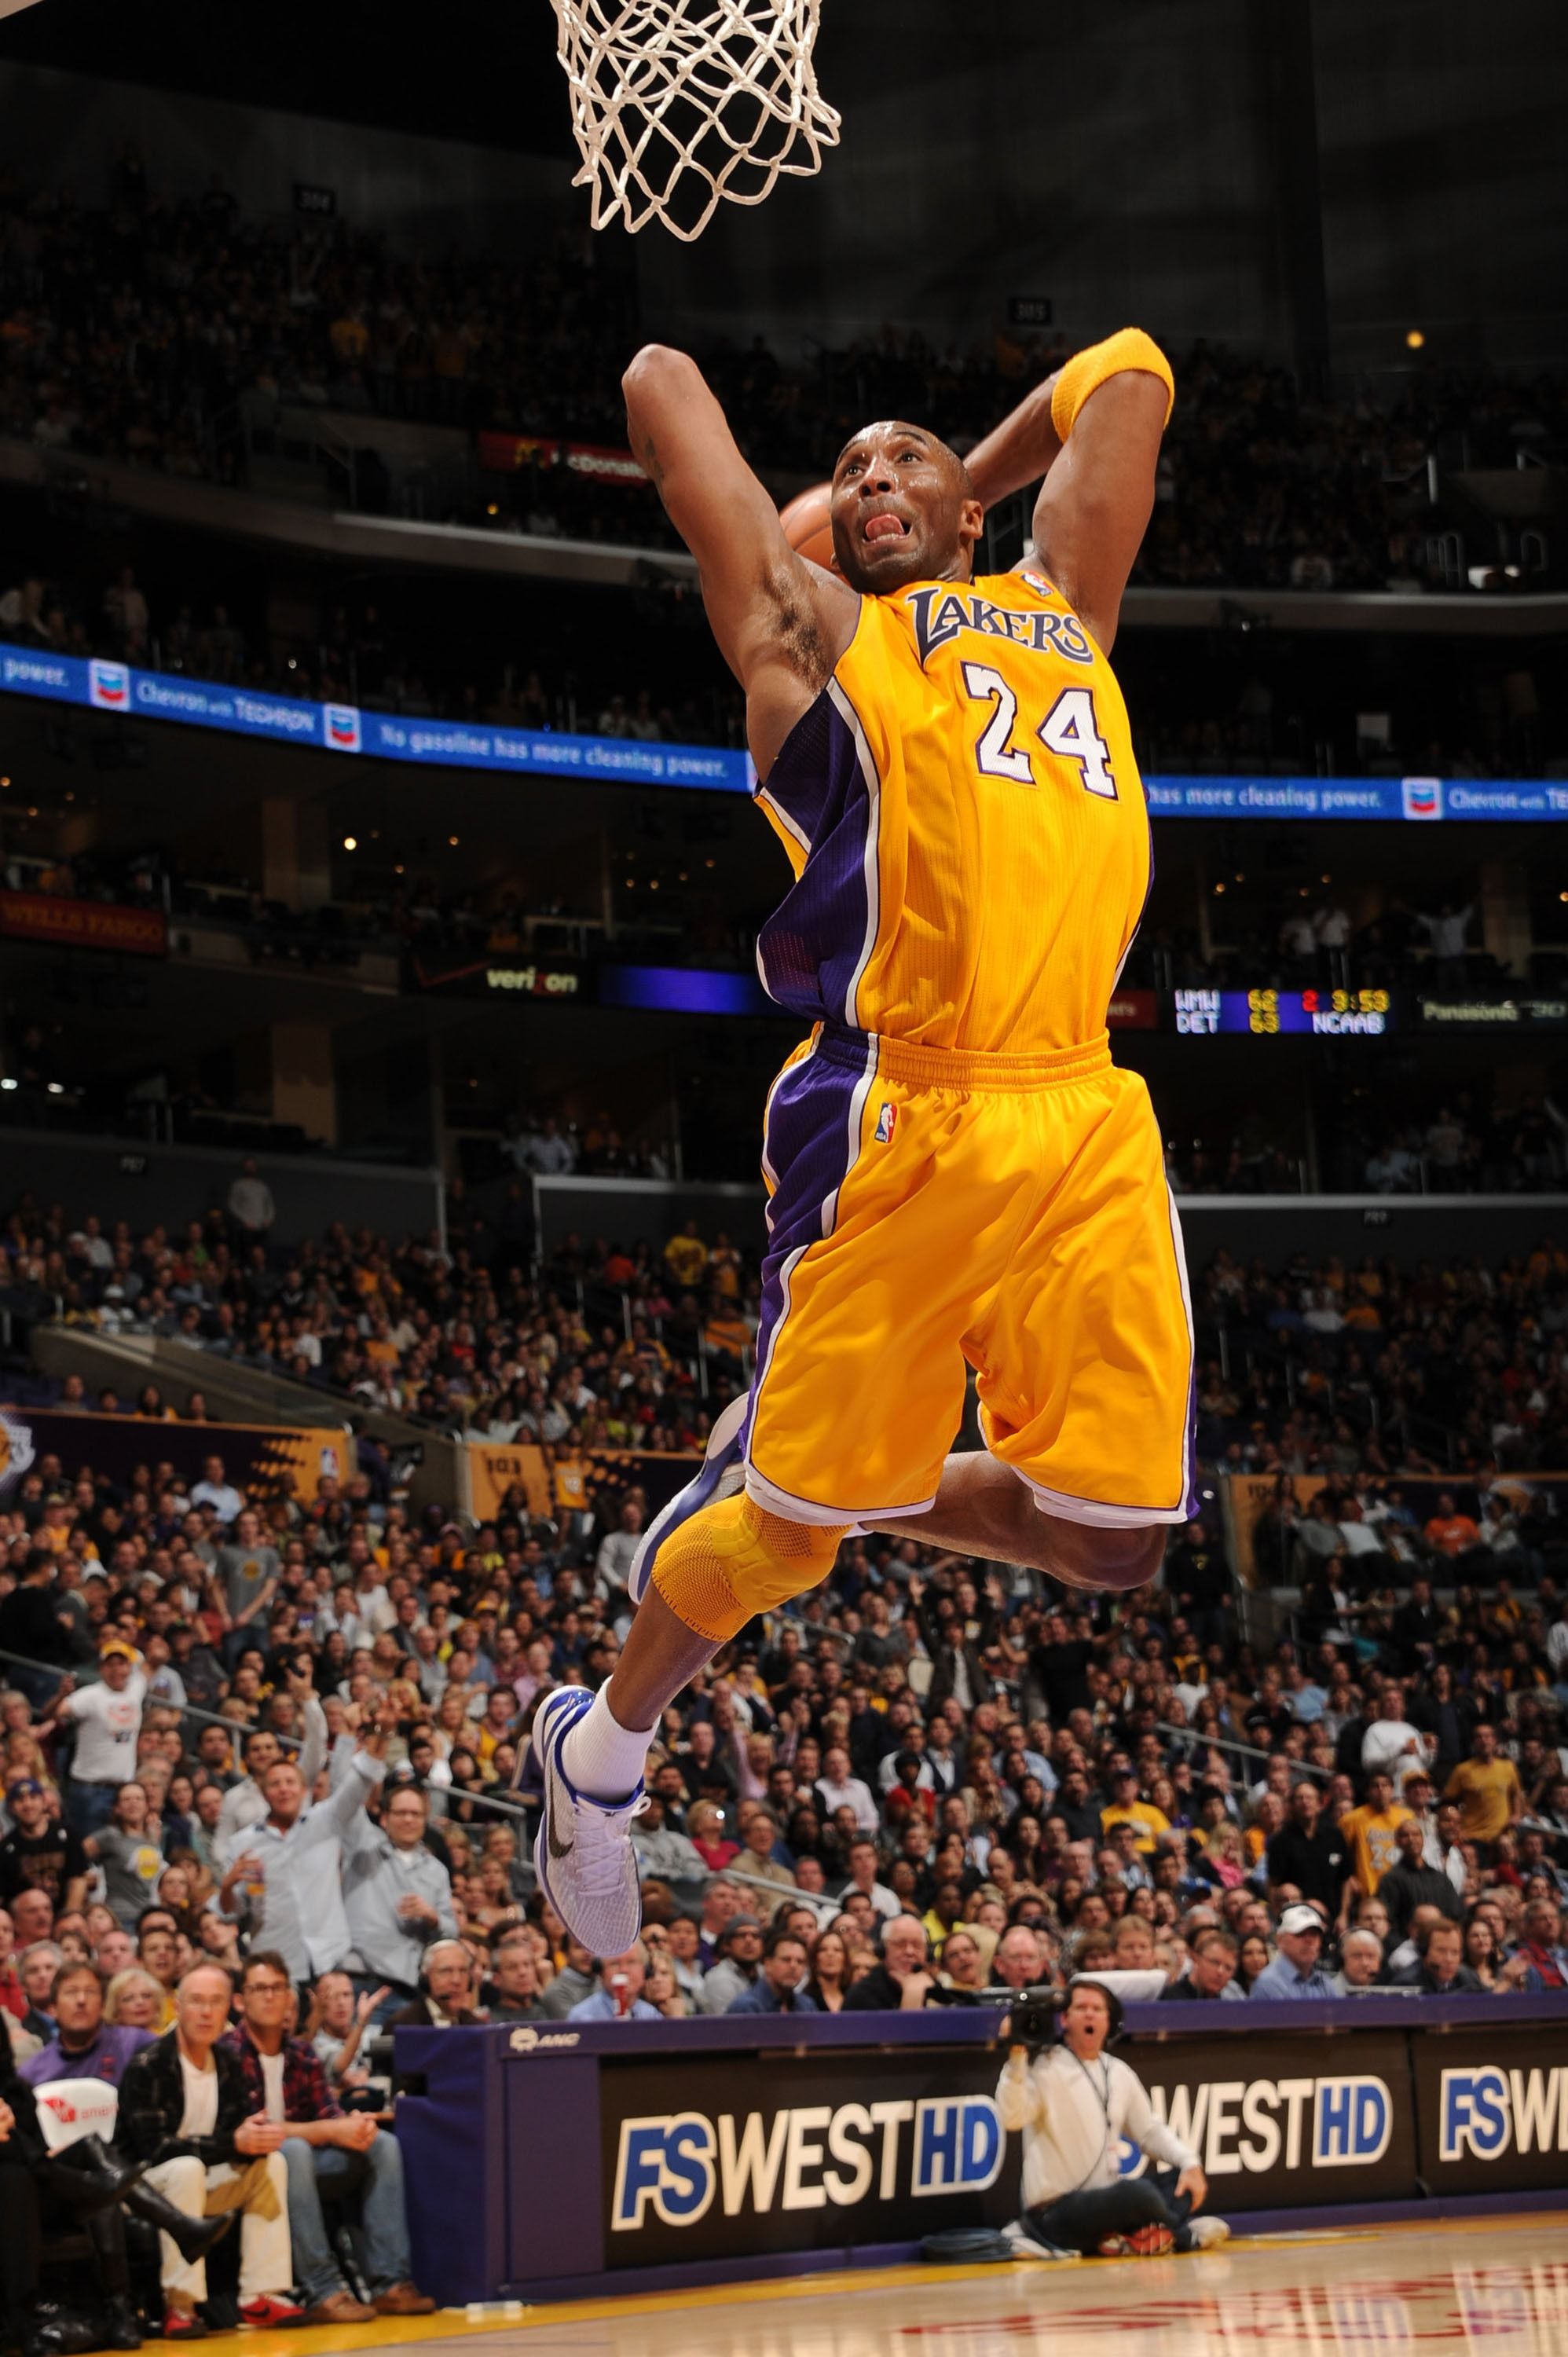 Kobe Bryant dunking during one of his games in the NBA | Source: Getty Images/GlobalImagesUkraine